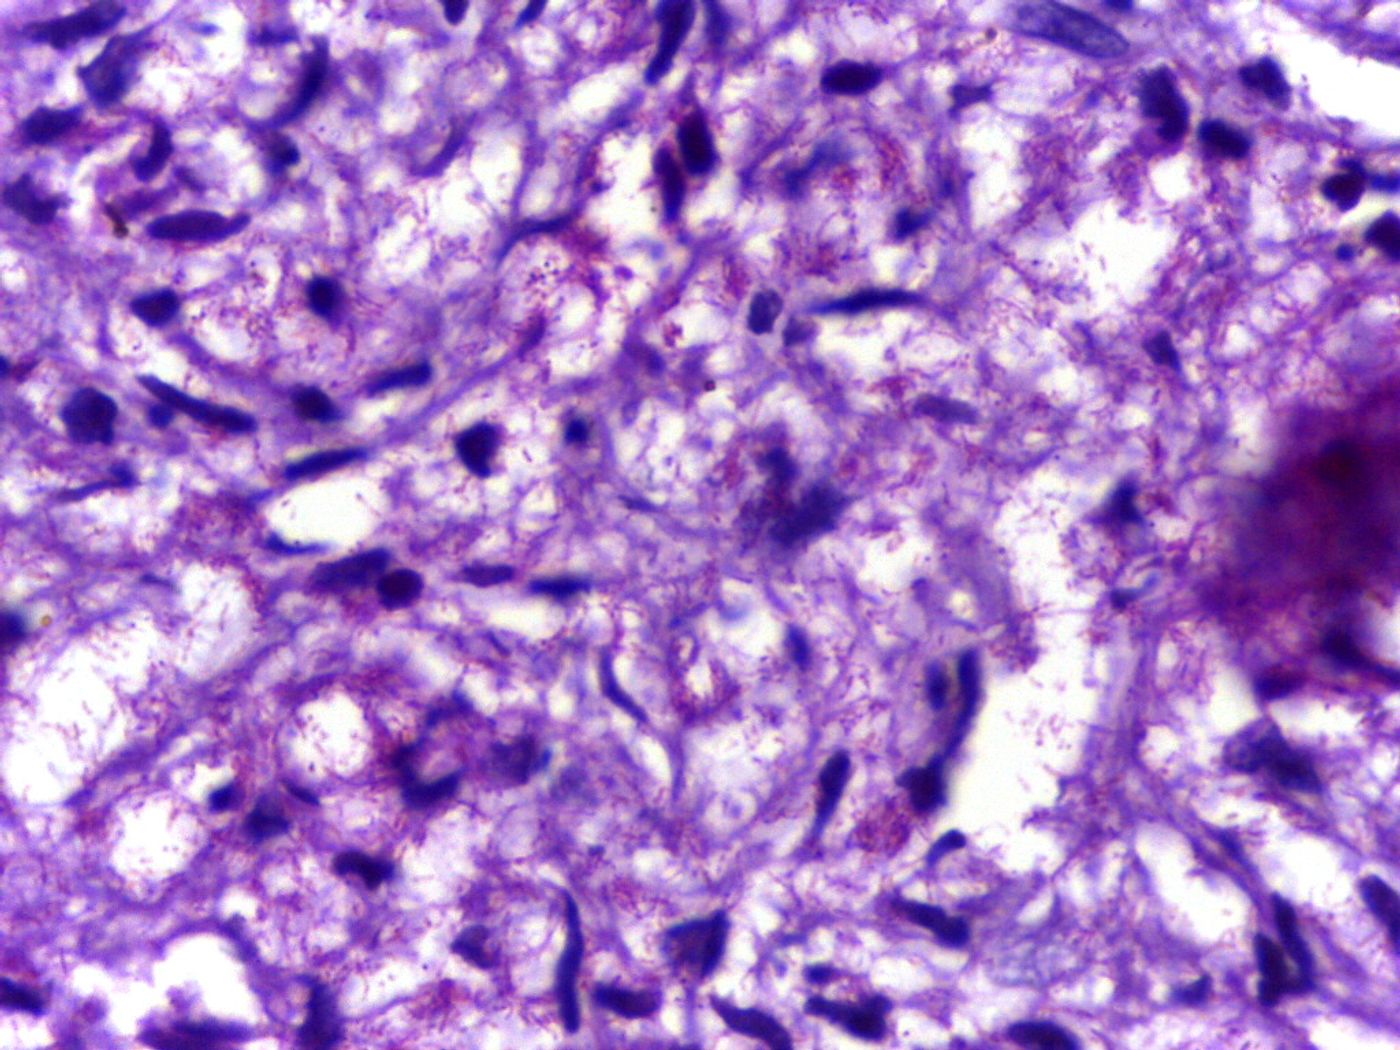 Modified AFB staining in a case of lepromatous leprosy showing numerous rod shaped acid fast bacilli. Department of Pathology, Calicut Medical College